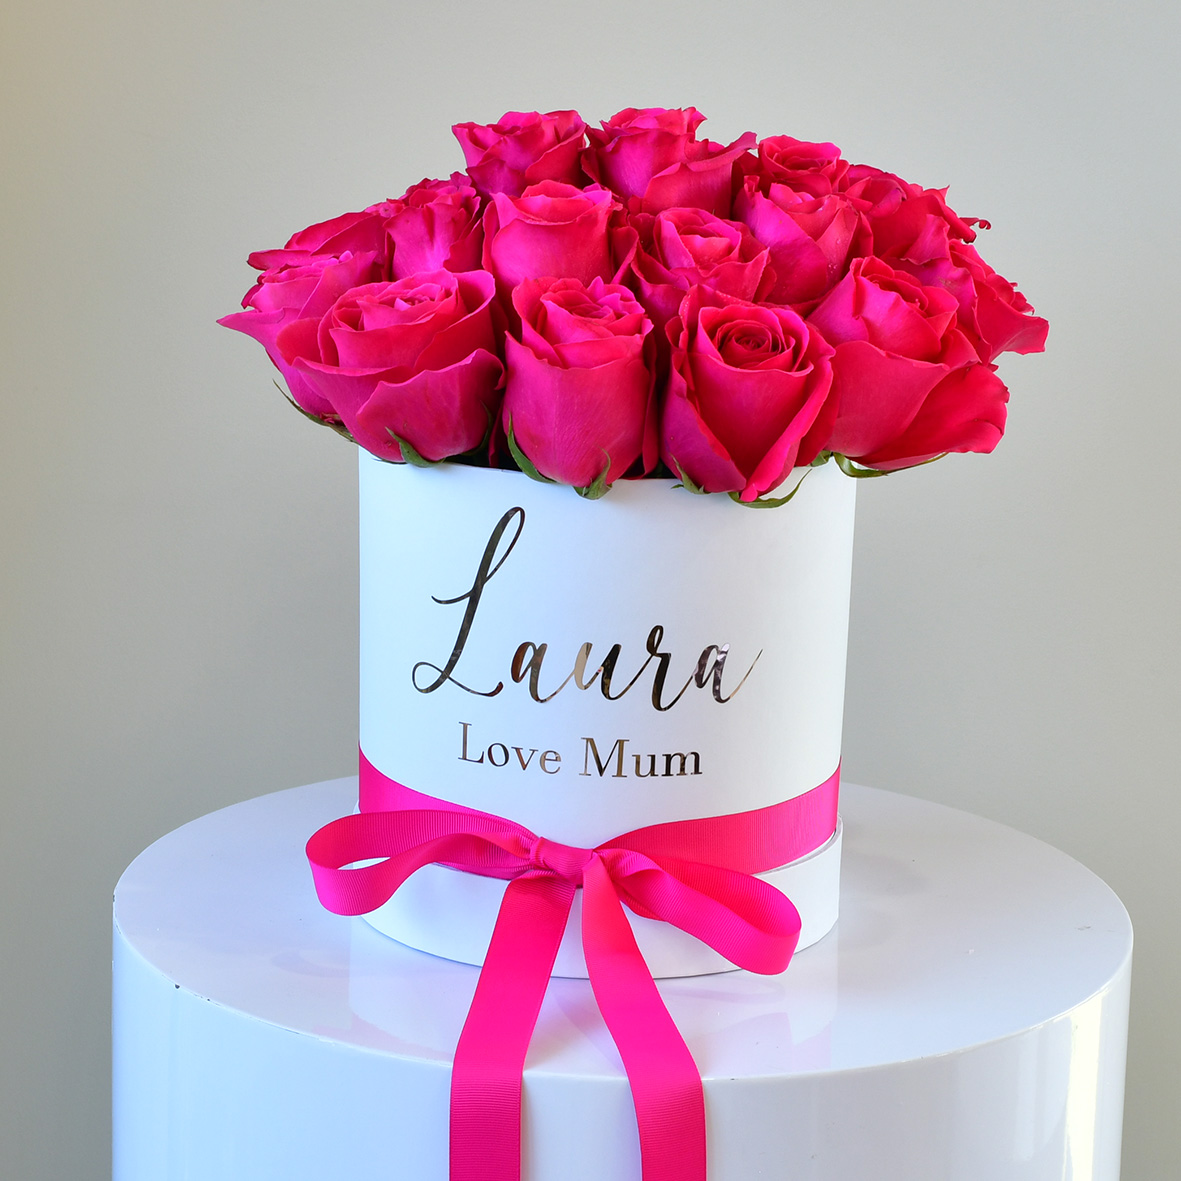 personalised flower box sydney delivery